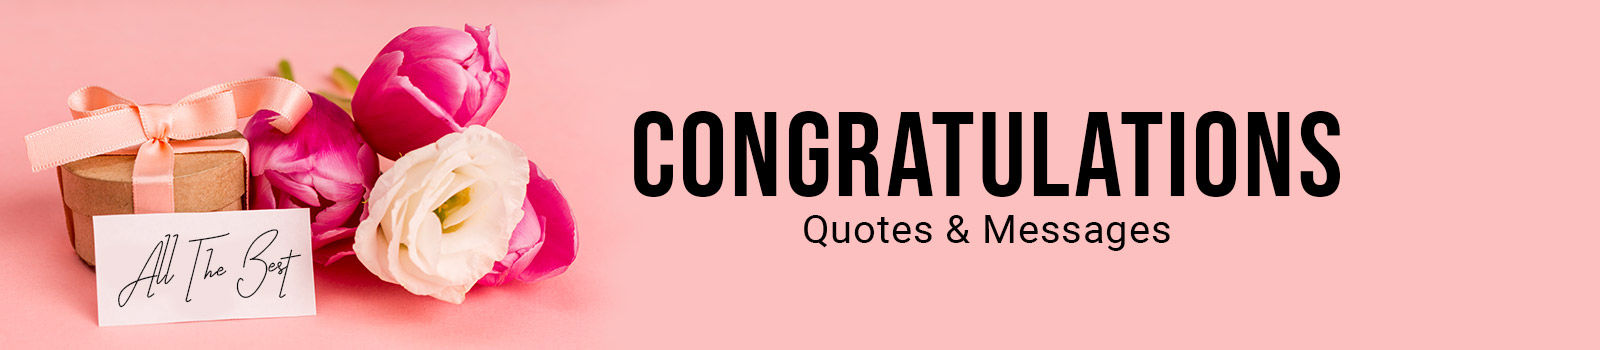 Congratulation Quotes and Messages